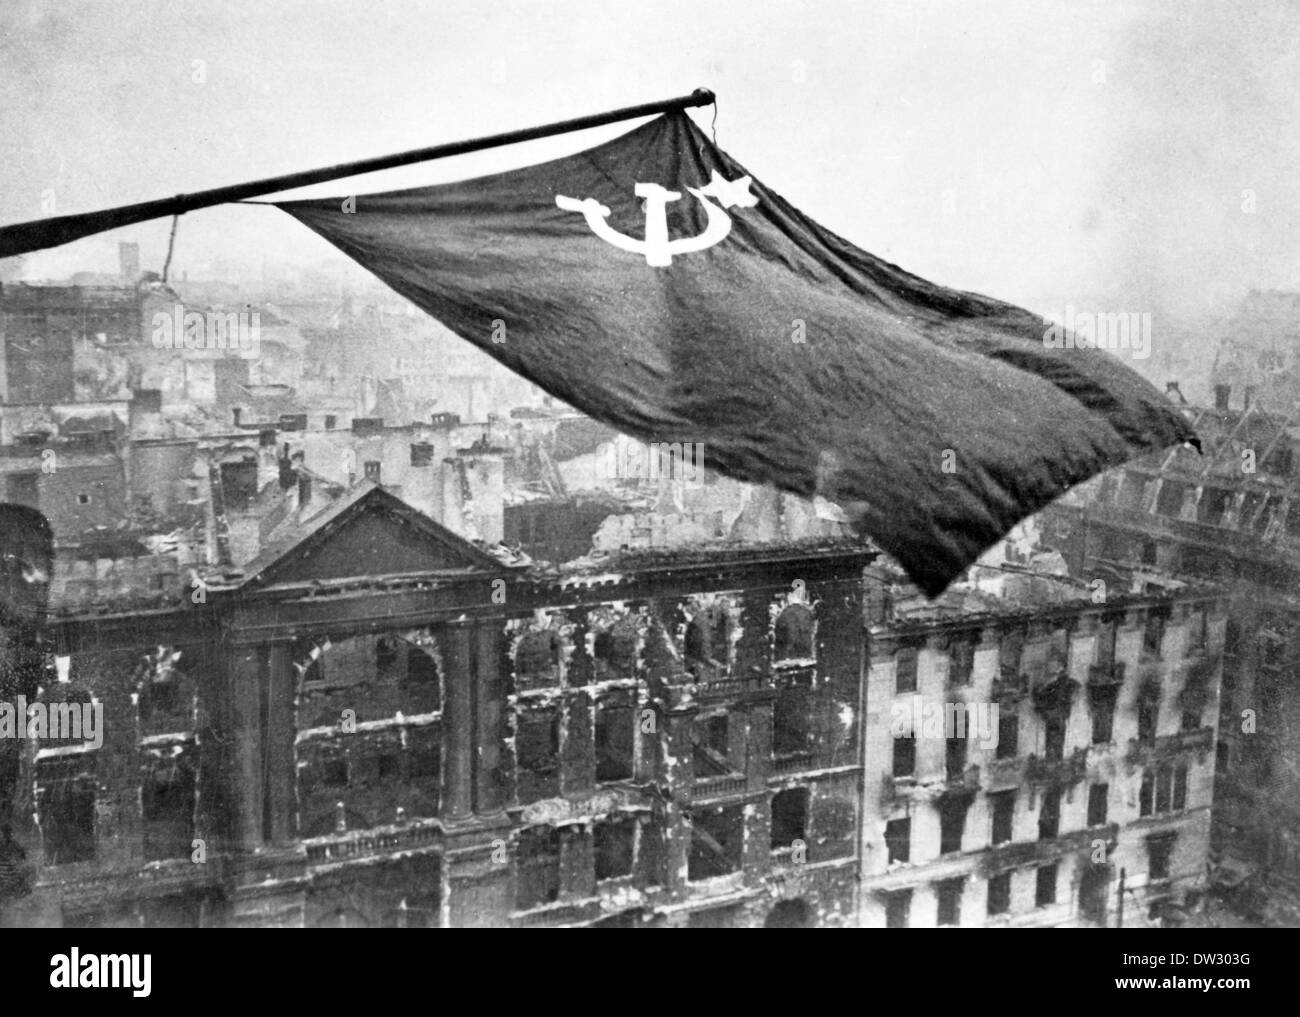 End of the war in Berlin 1945 - The Soviet flag waves over the destroyed city after the German capitulation in Berlin, germany, May 1945. Fotoarchiv für Zeitgeschichte - NO WIRE SERVICE Stock Photo